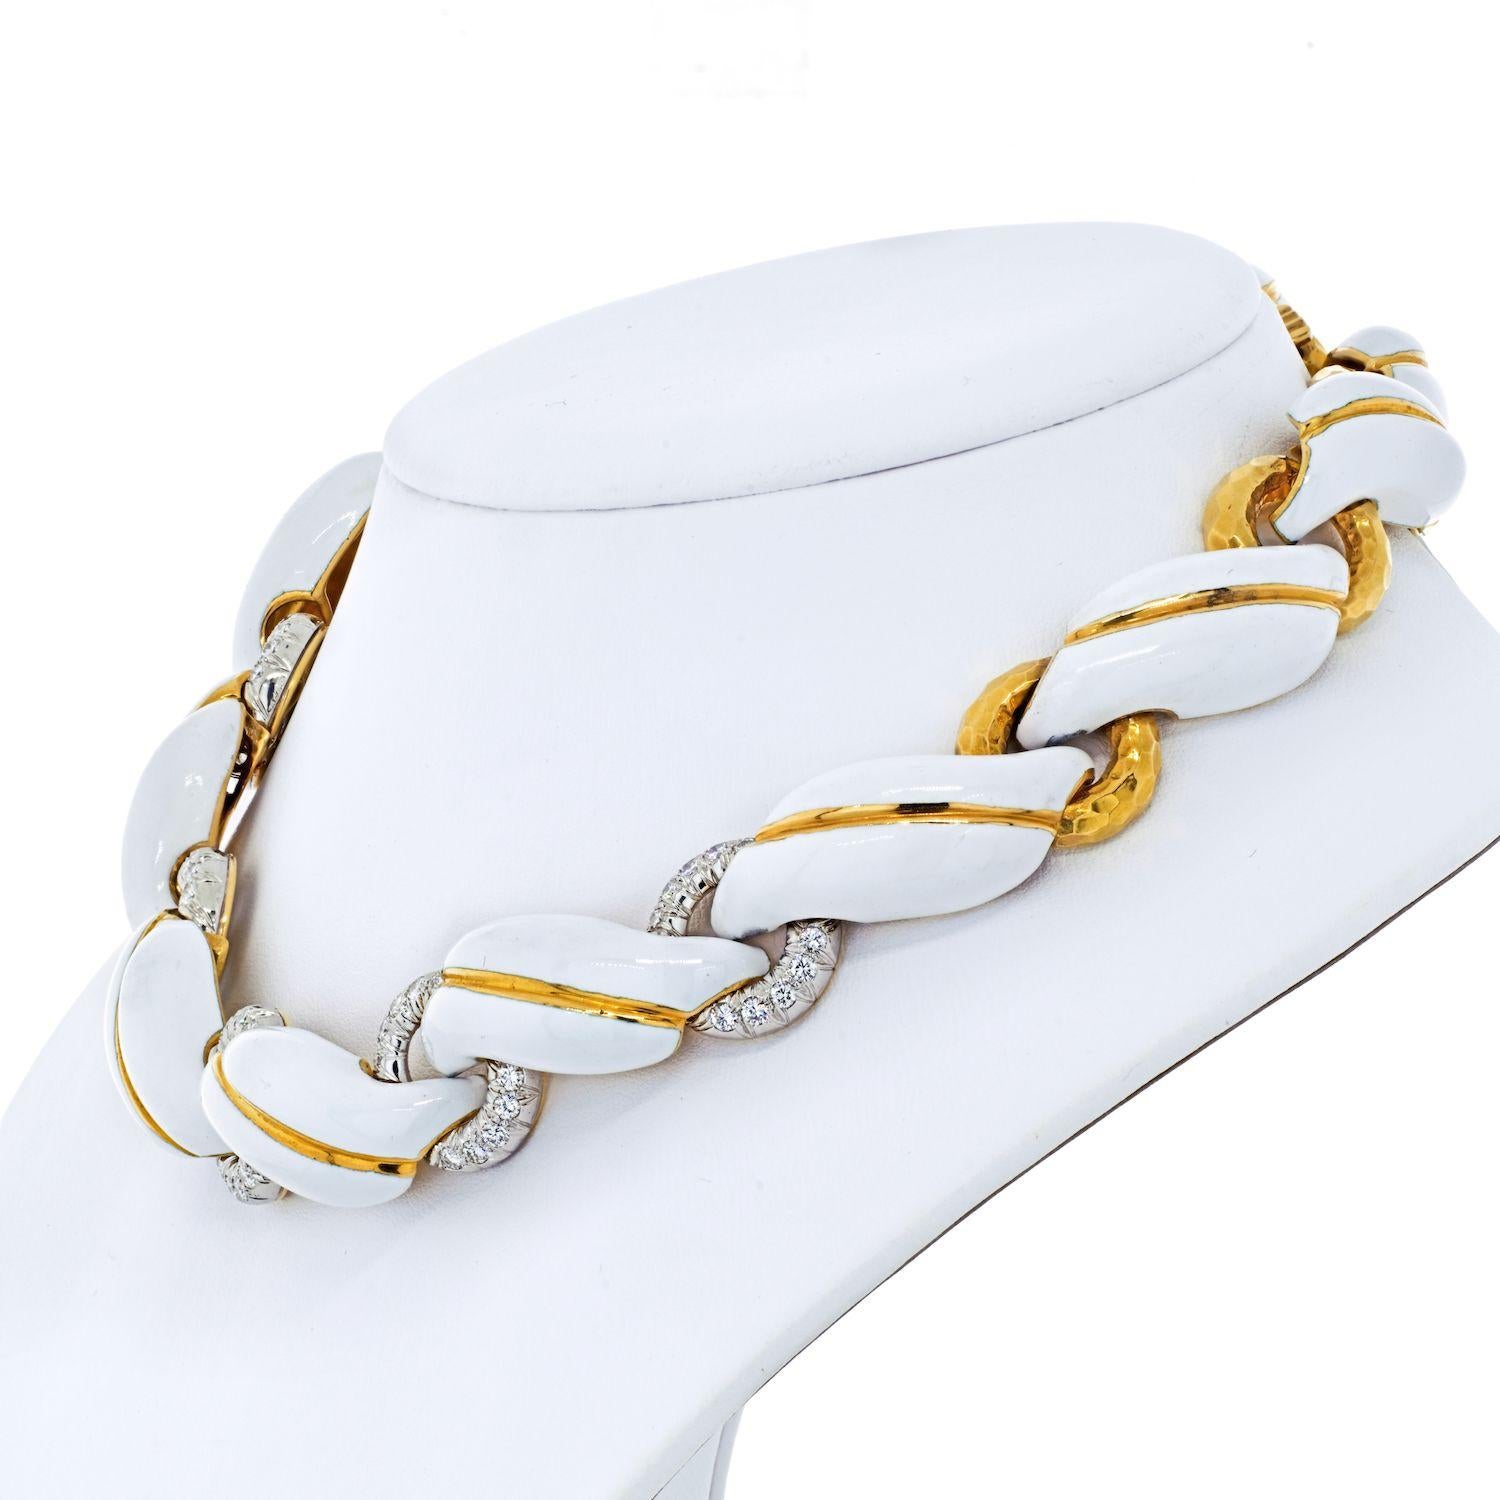 A vintage David Webb 18K yellow gold and platinum white enamel collar with round brilliant-cut diamonds in a relaxed 